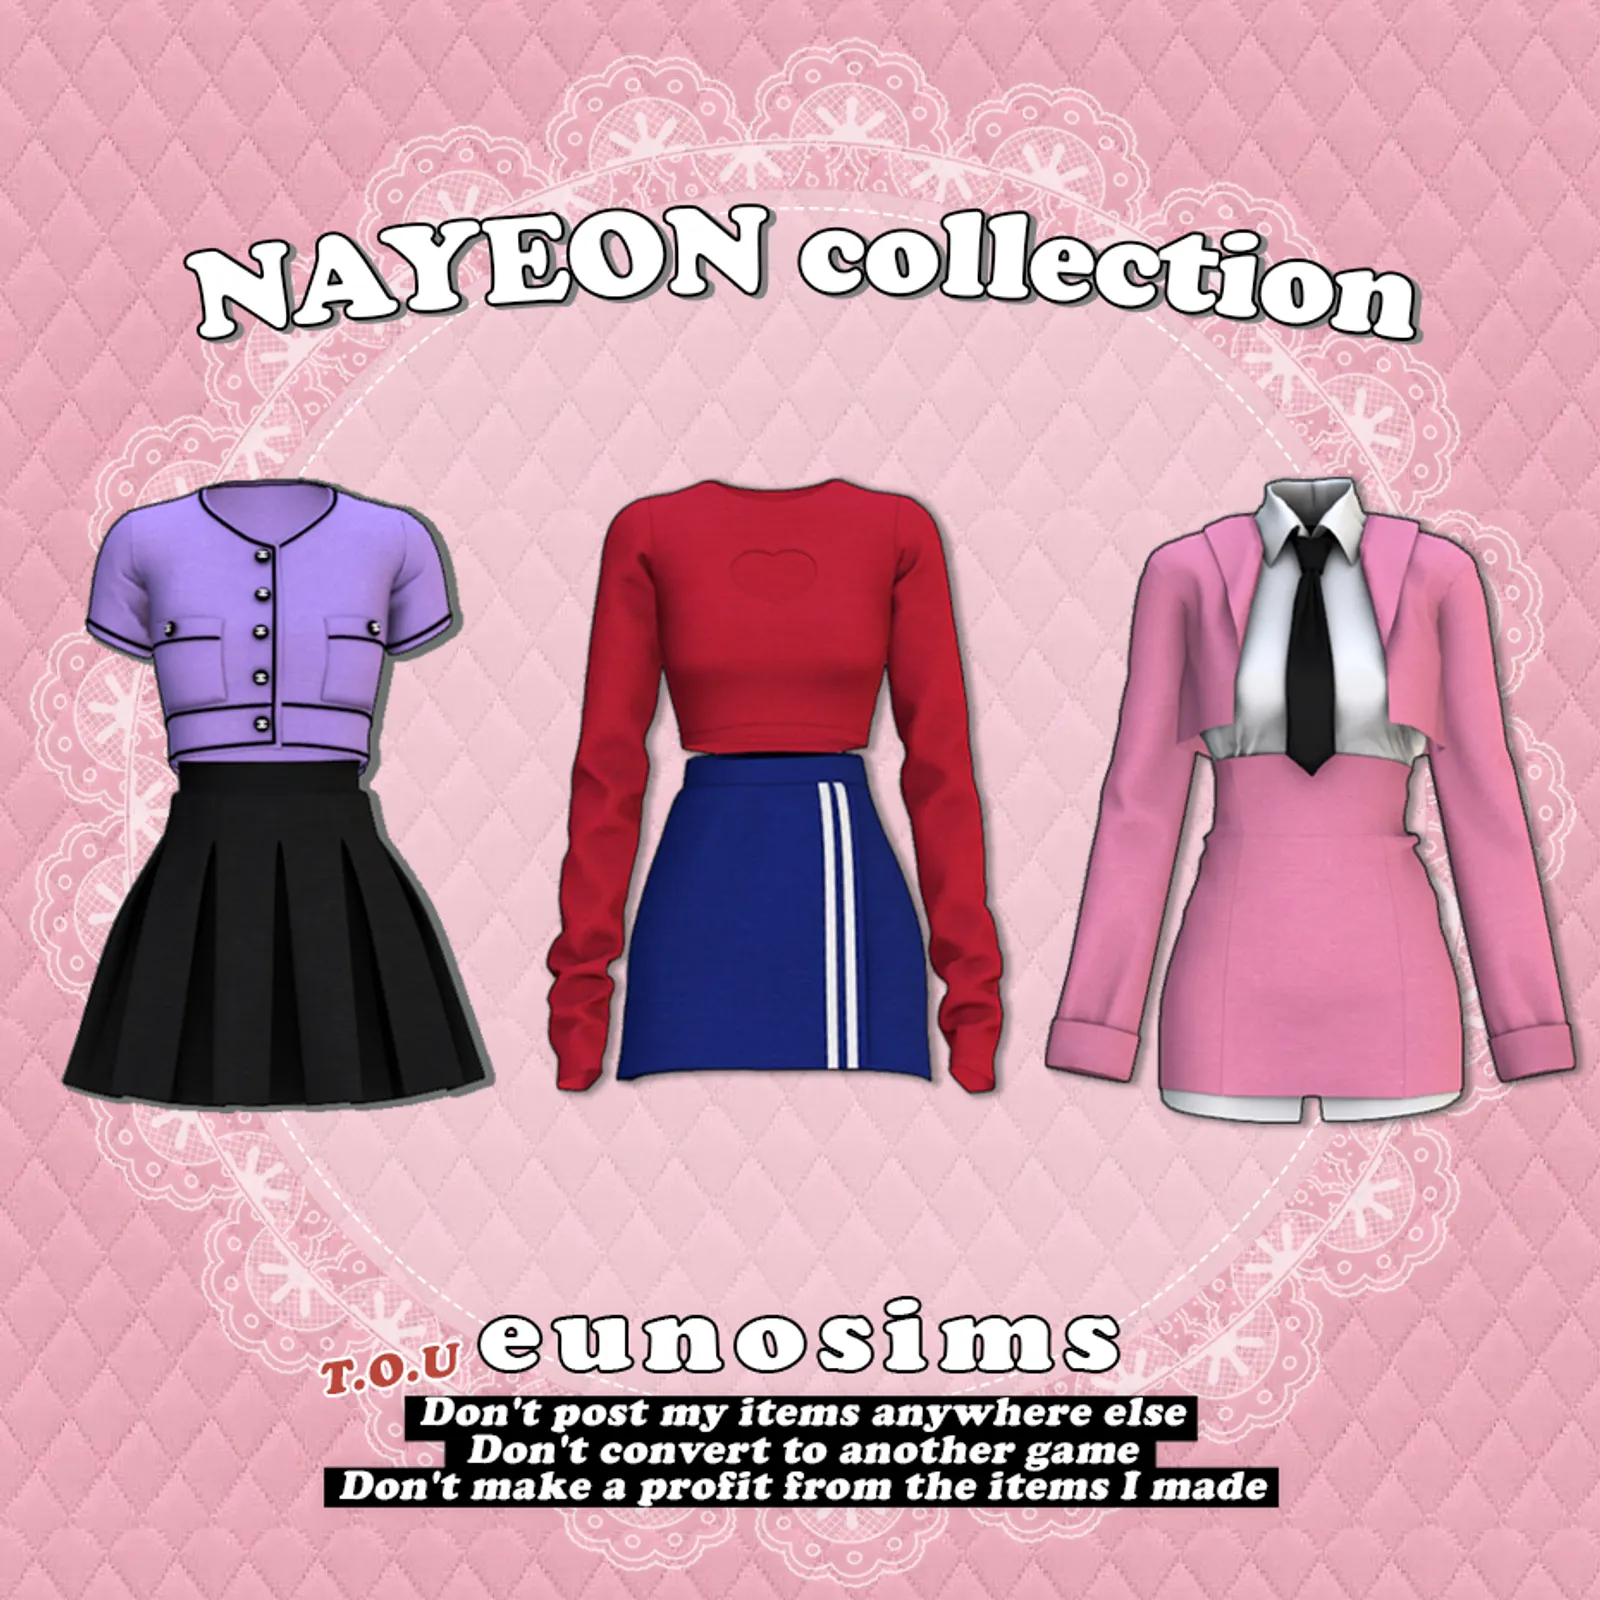 NAYEON collection